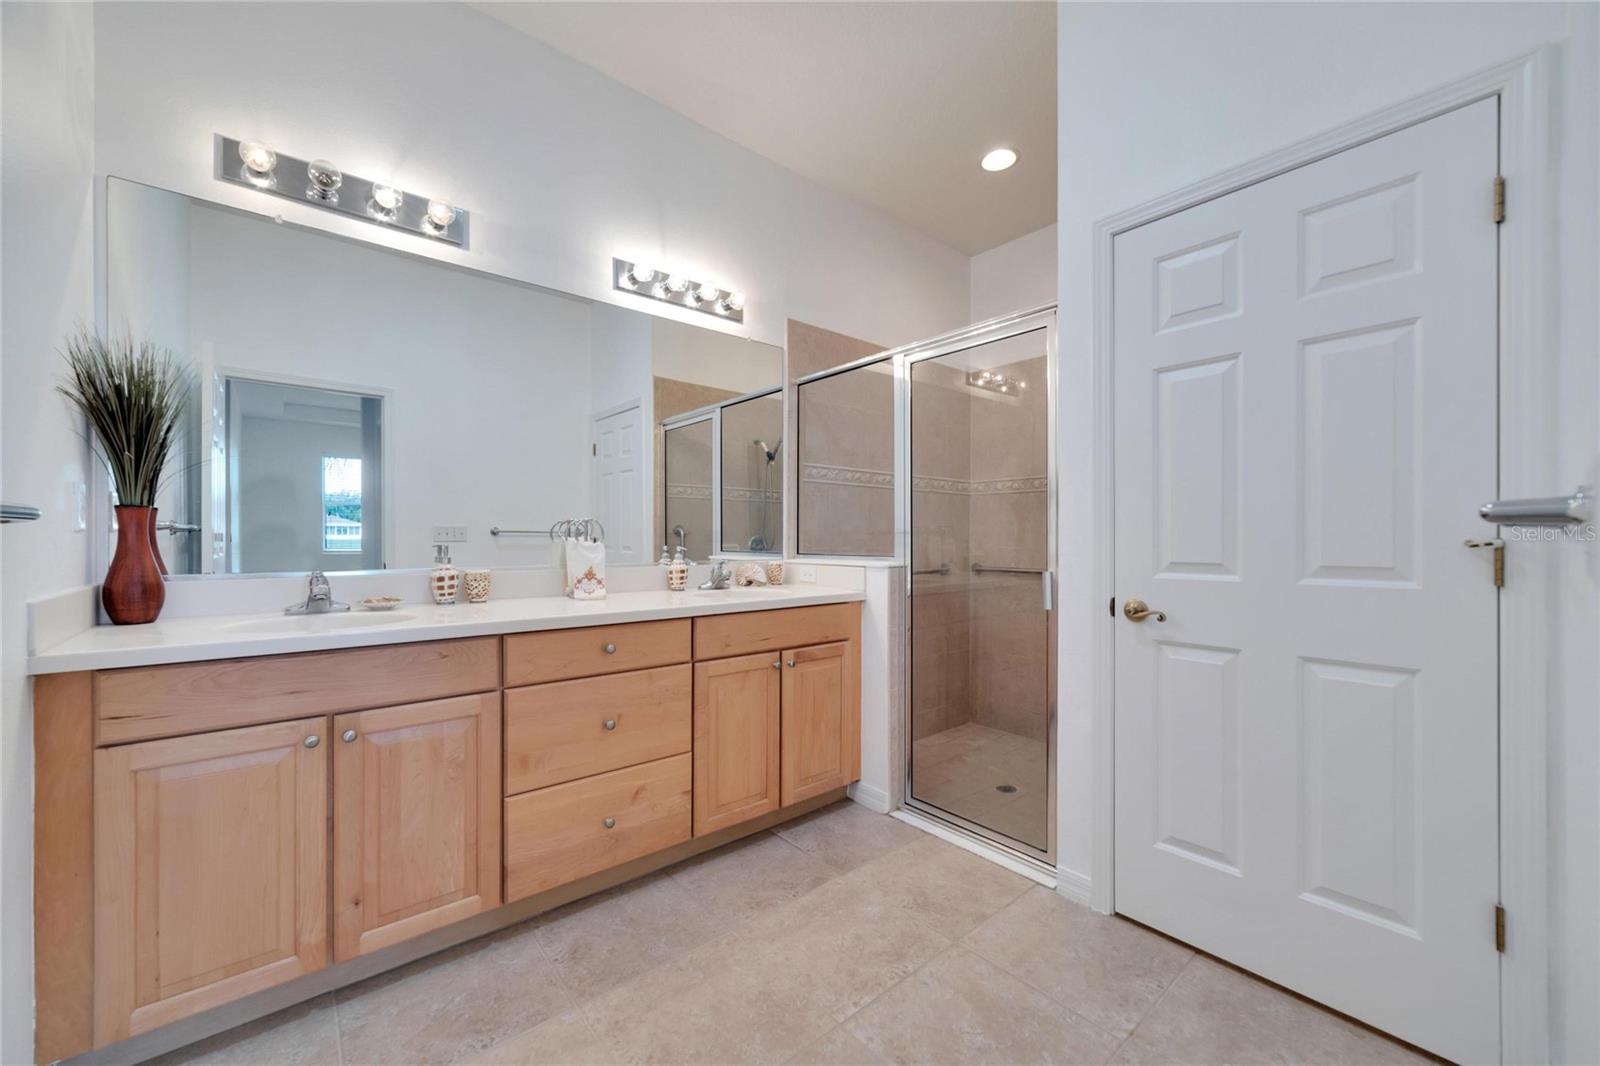 The master bath has twin vanities, high countertops and a huge walk-in shower